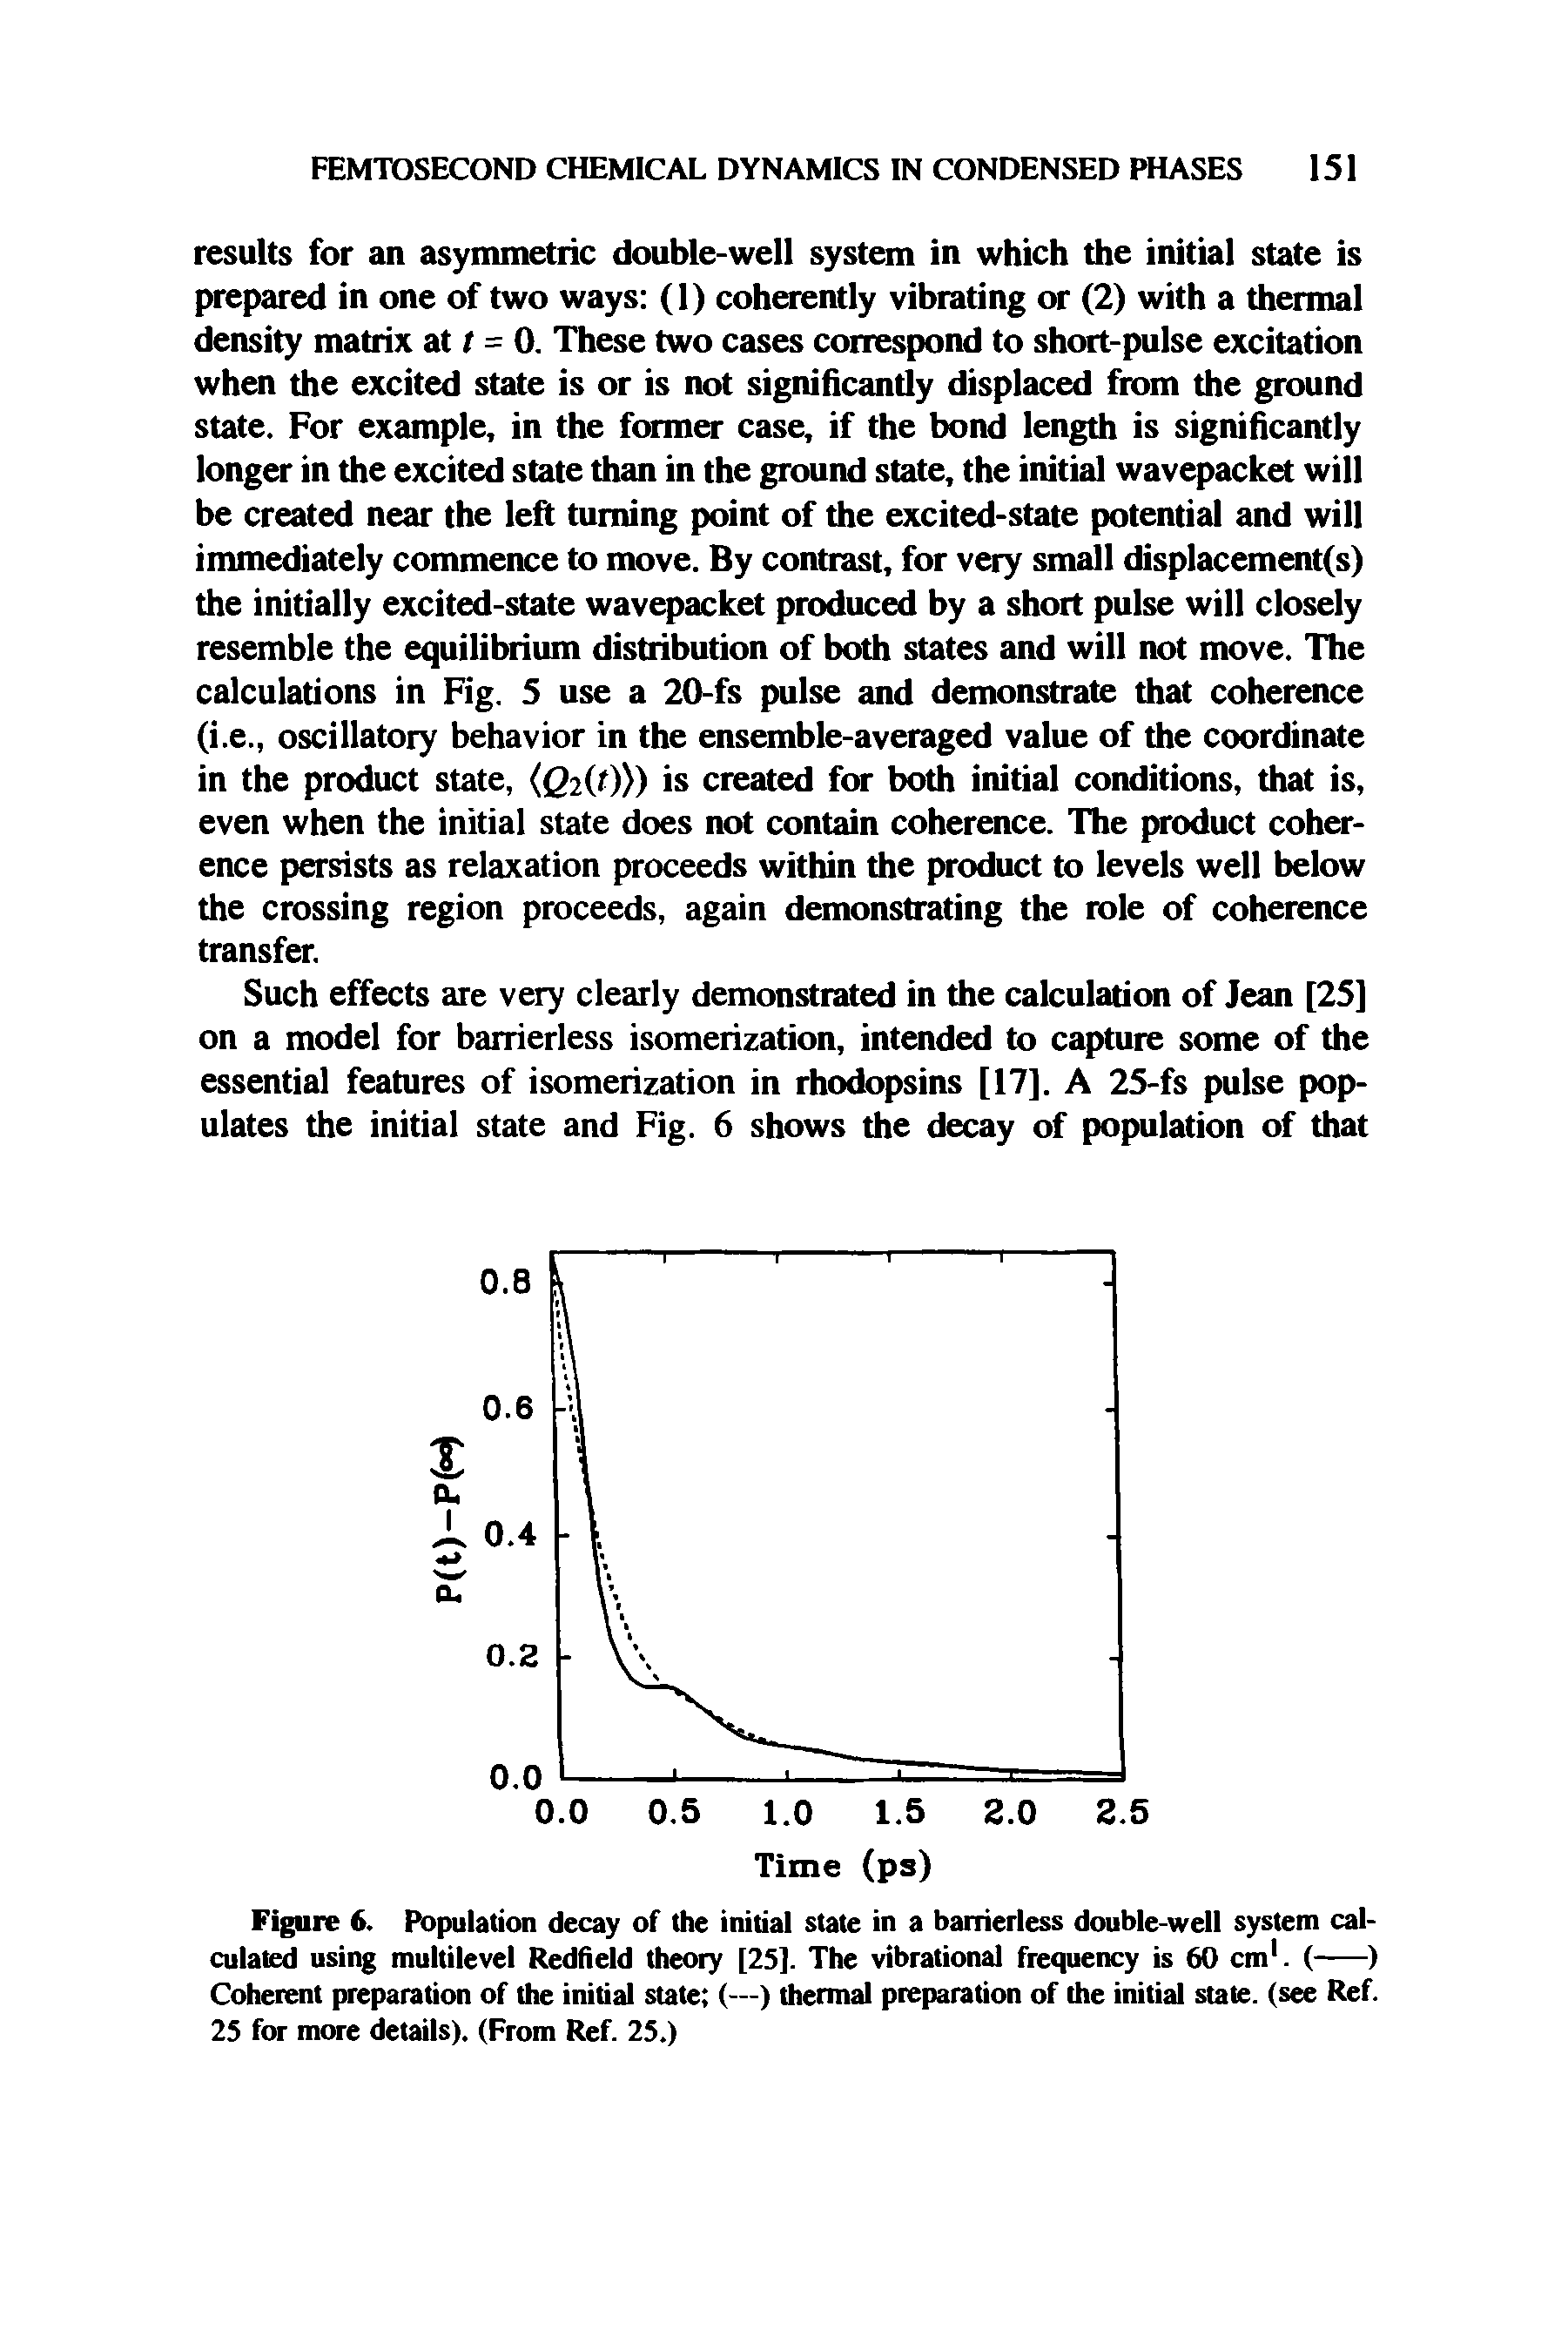 Figure 6. Population decay of the initial state in a barrierless double-well system calculated using multilevel Redfield theory [25]. The vibrational frequency is 60 cm1. (----------)...